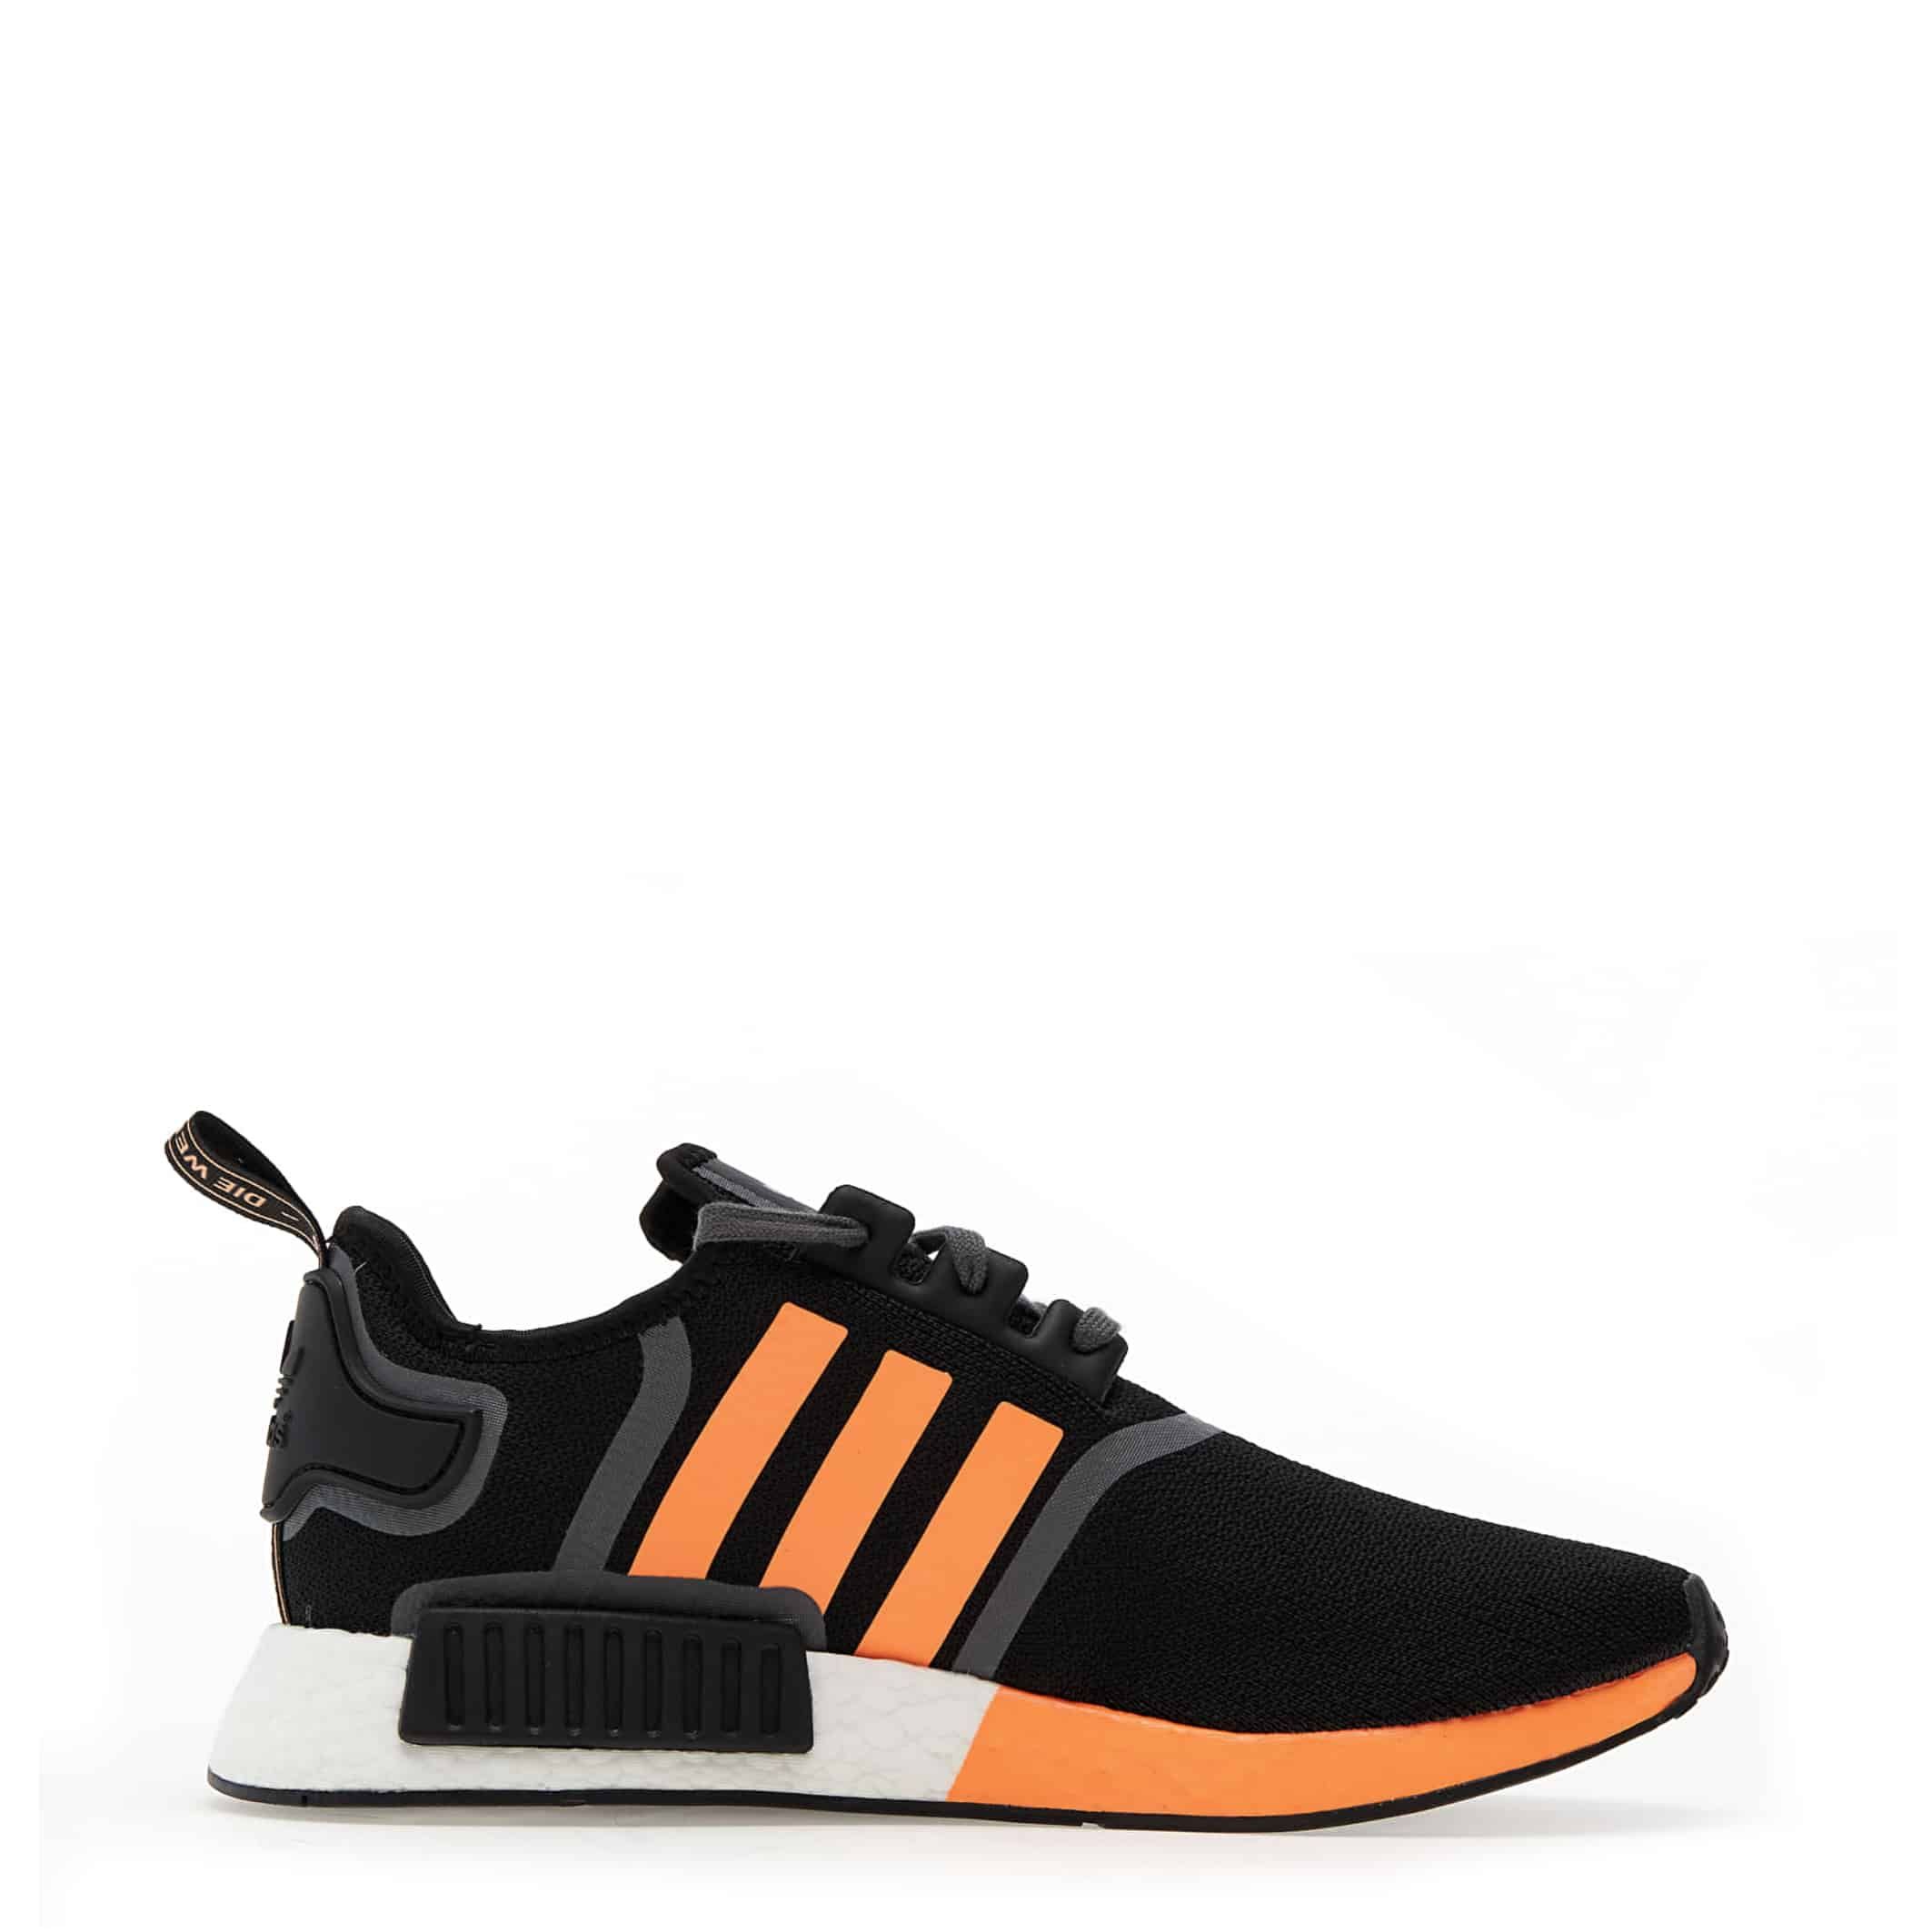 Chaussures sneakers adidas unisex uk 10.5